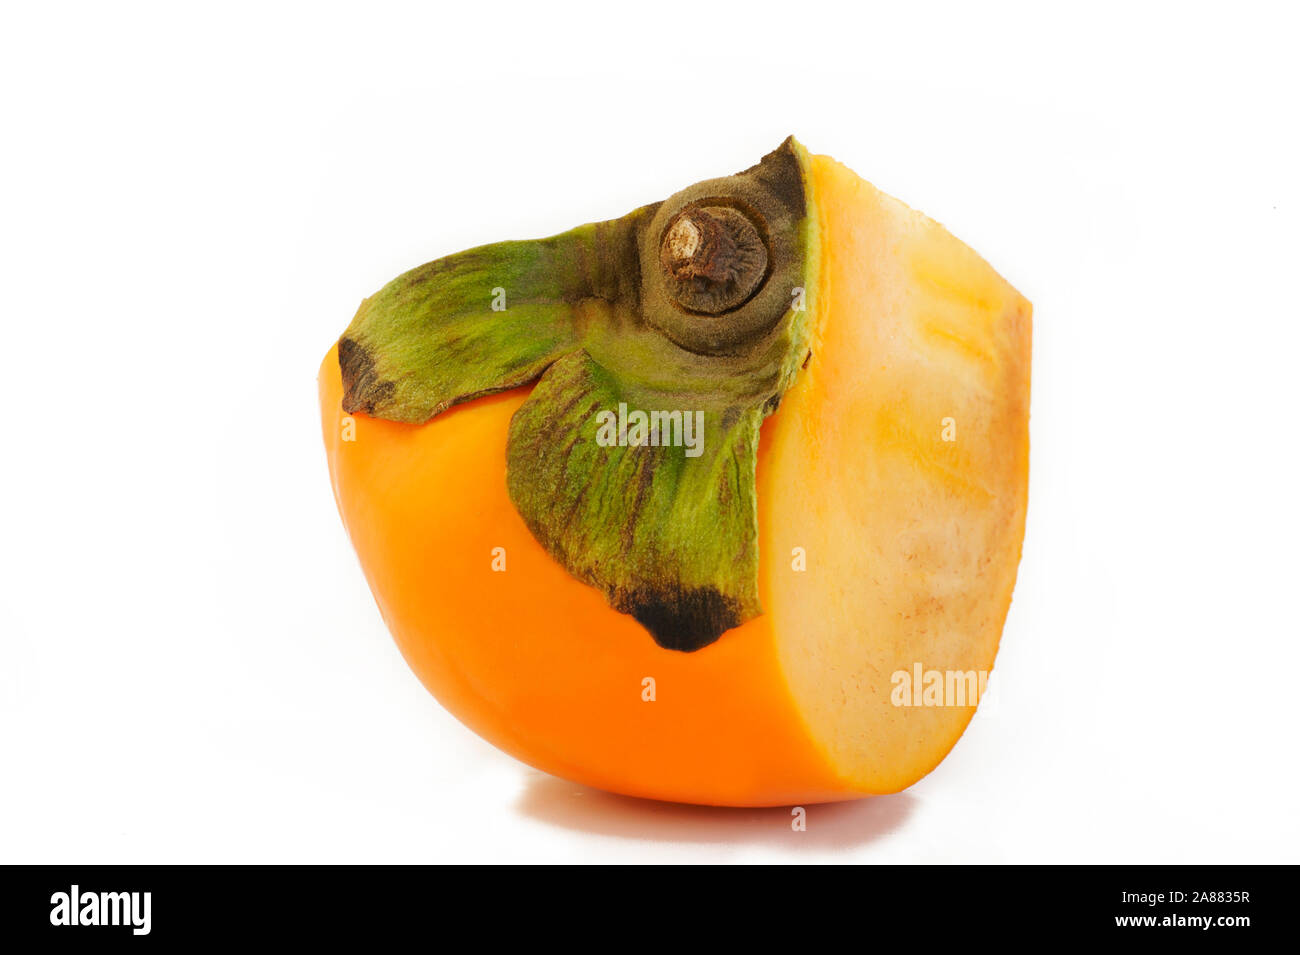 sliced persimmon isolated on white background Stock Photo